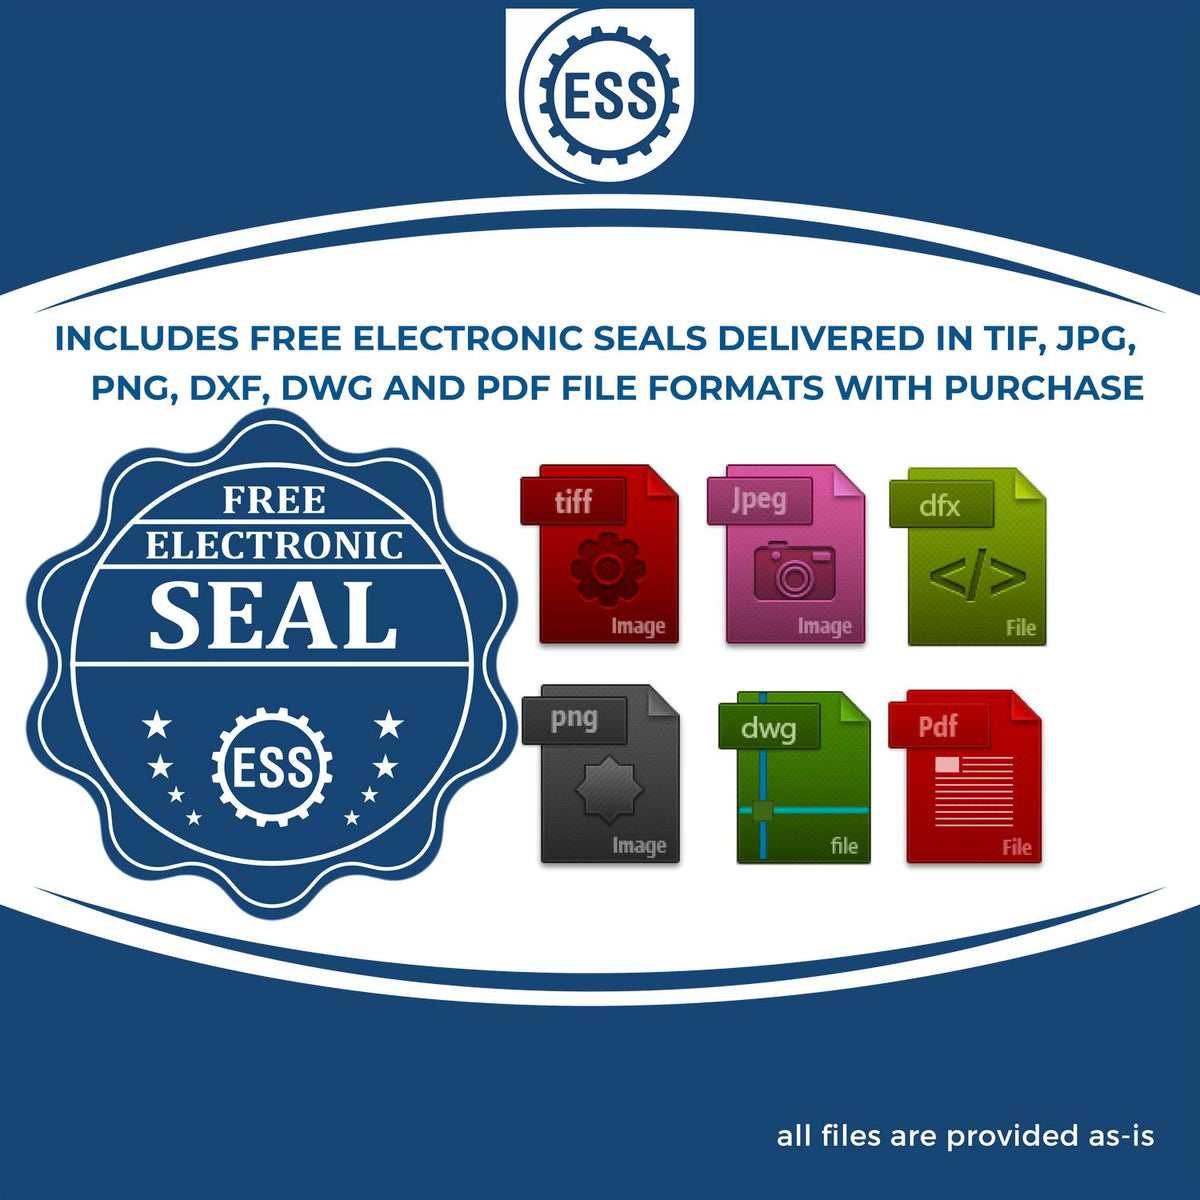 An infographic for the free electronic seal for the West Virginia Desk Architect Embossing Seal illustrating the different file type icons such as DXF, DWG, TIF, JPG and PNG.